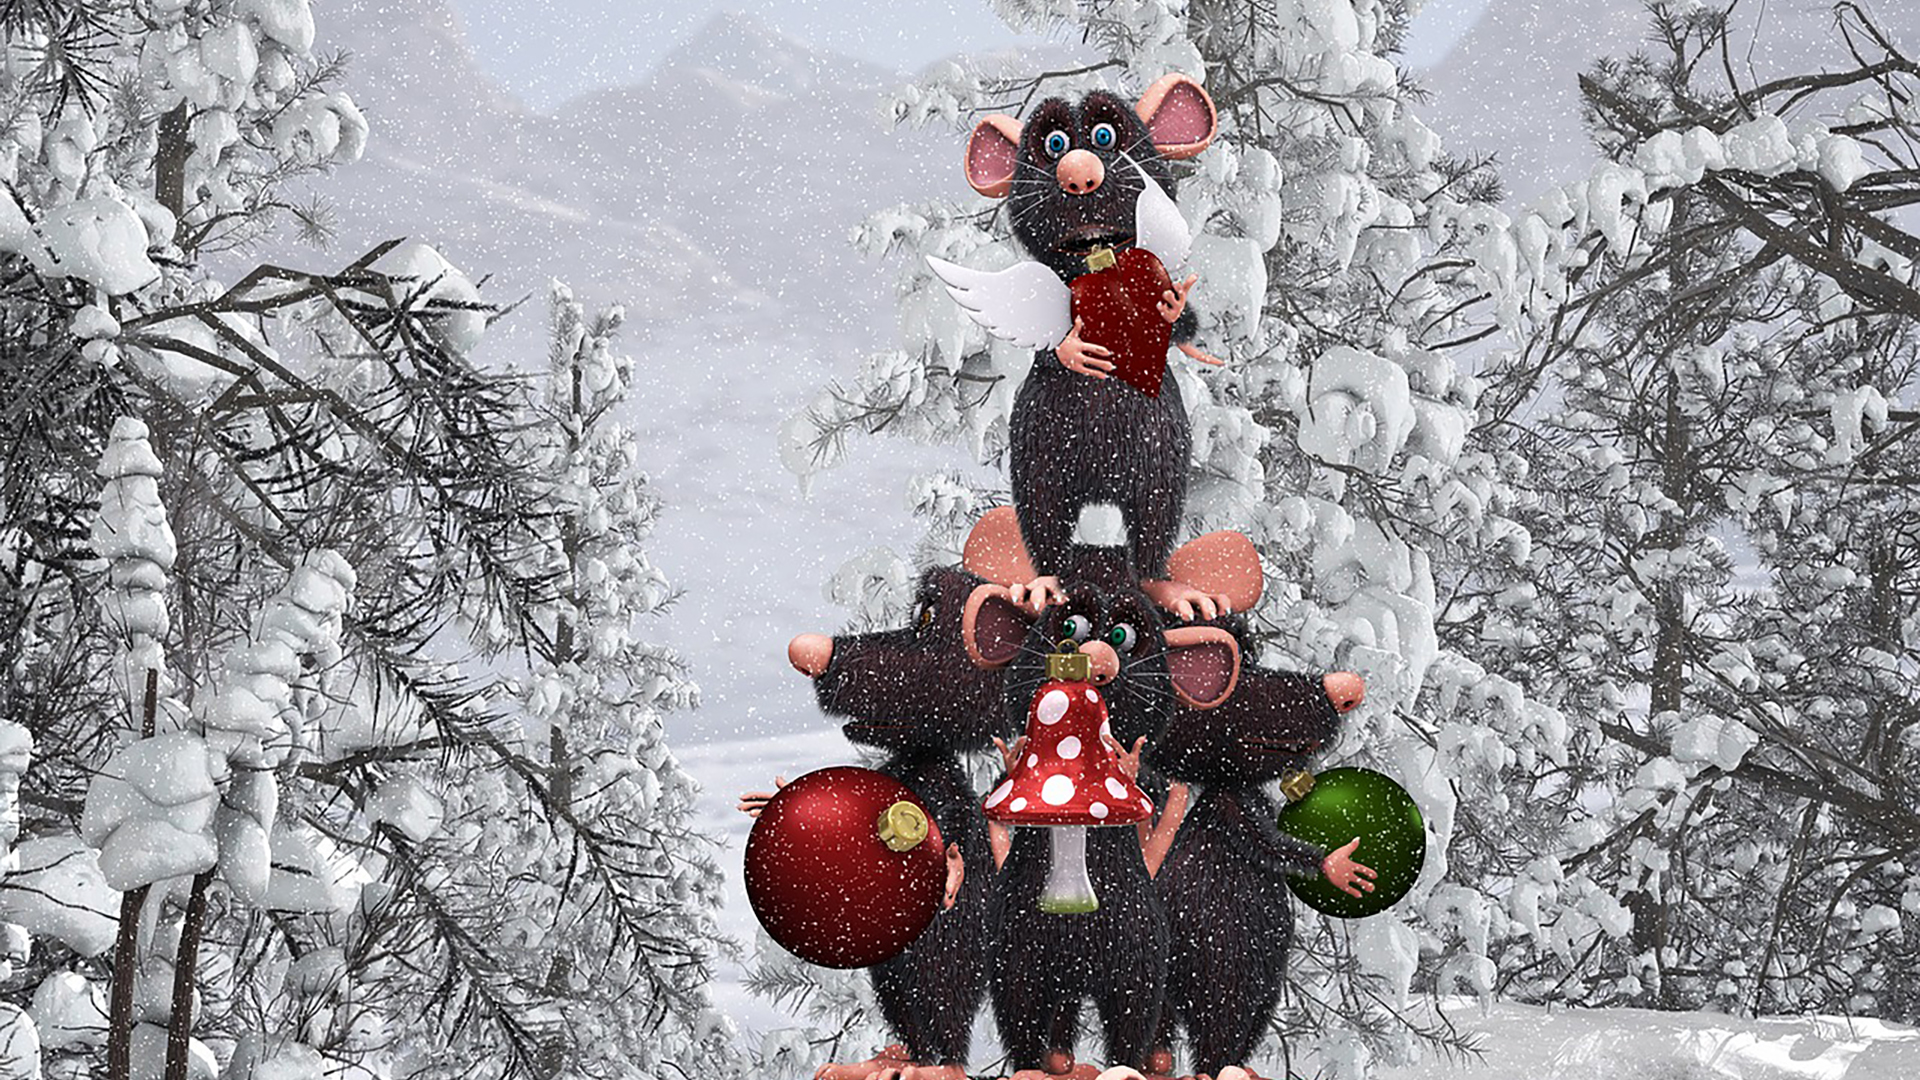 Cartoon mice stacked like a Christmas tree and holding ornaments